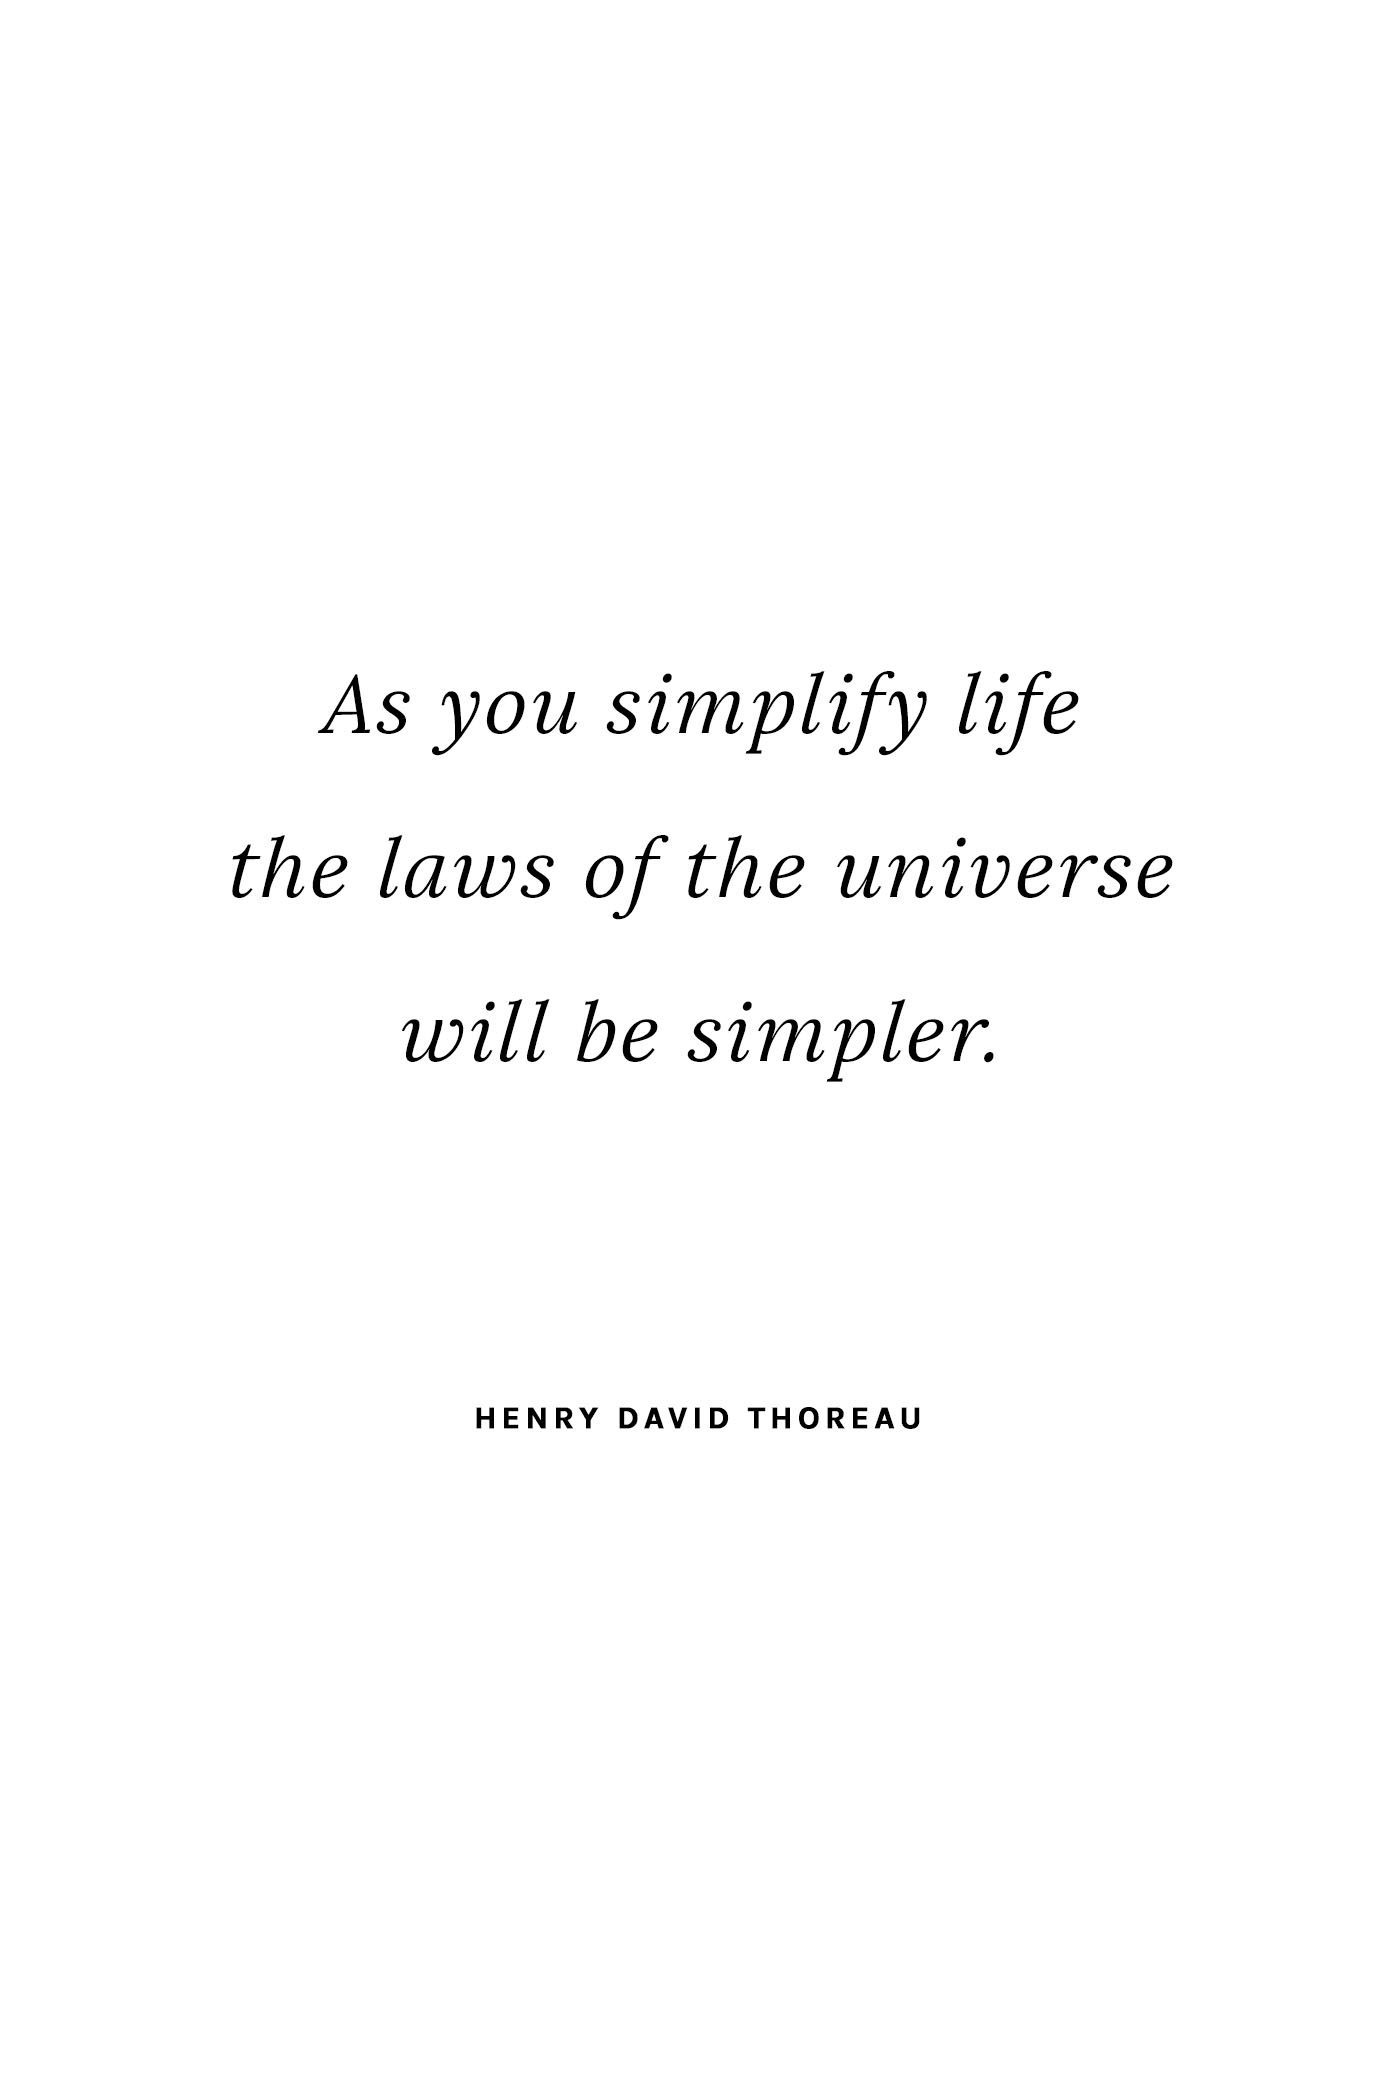 As you simplify life the laws of the universe will become simpler. - Henry David Thoreau | Simple parenting tips to simplify you and your child's life.